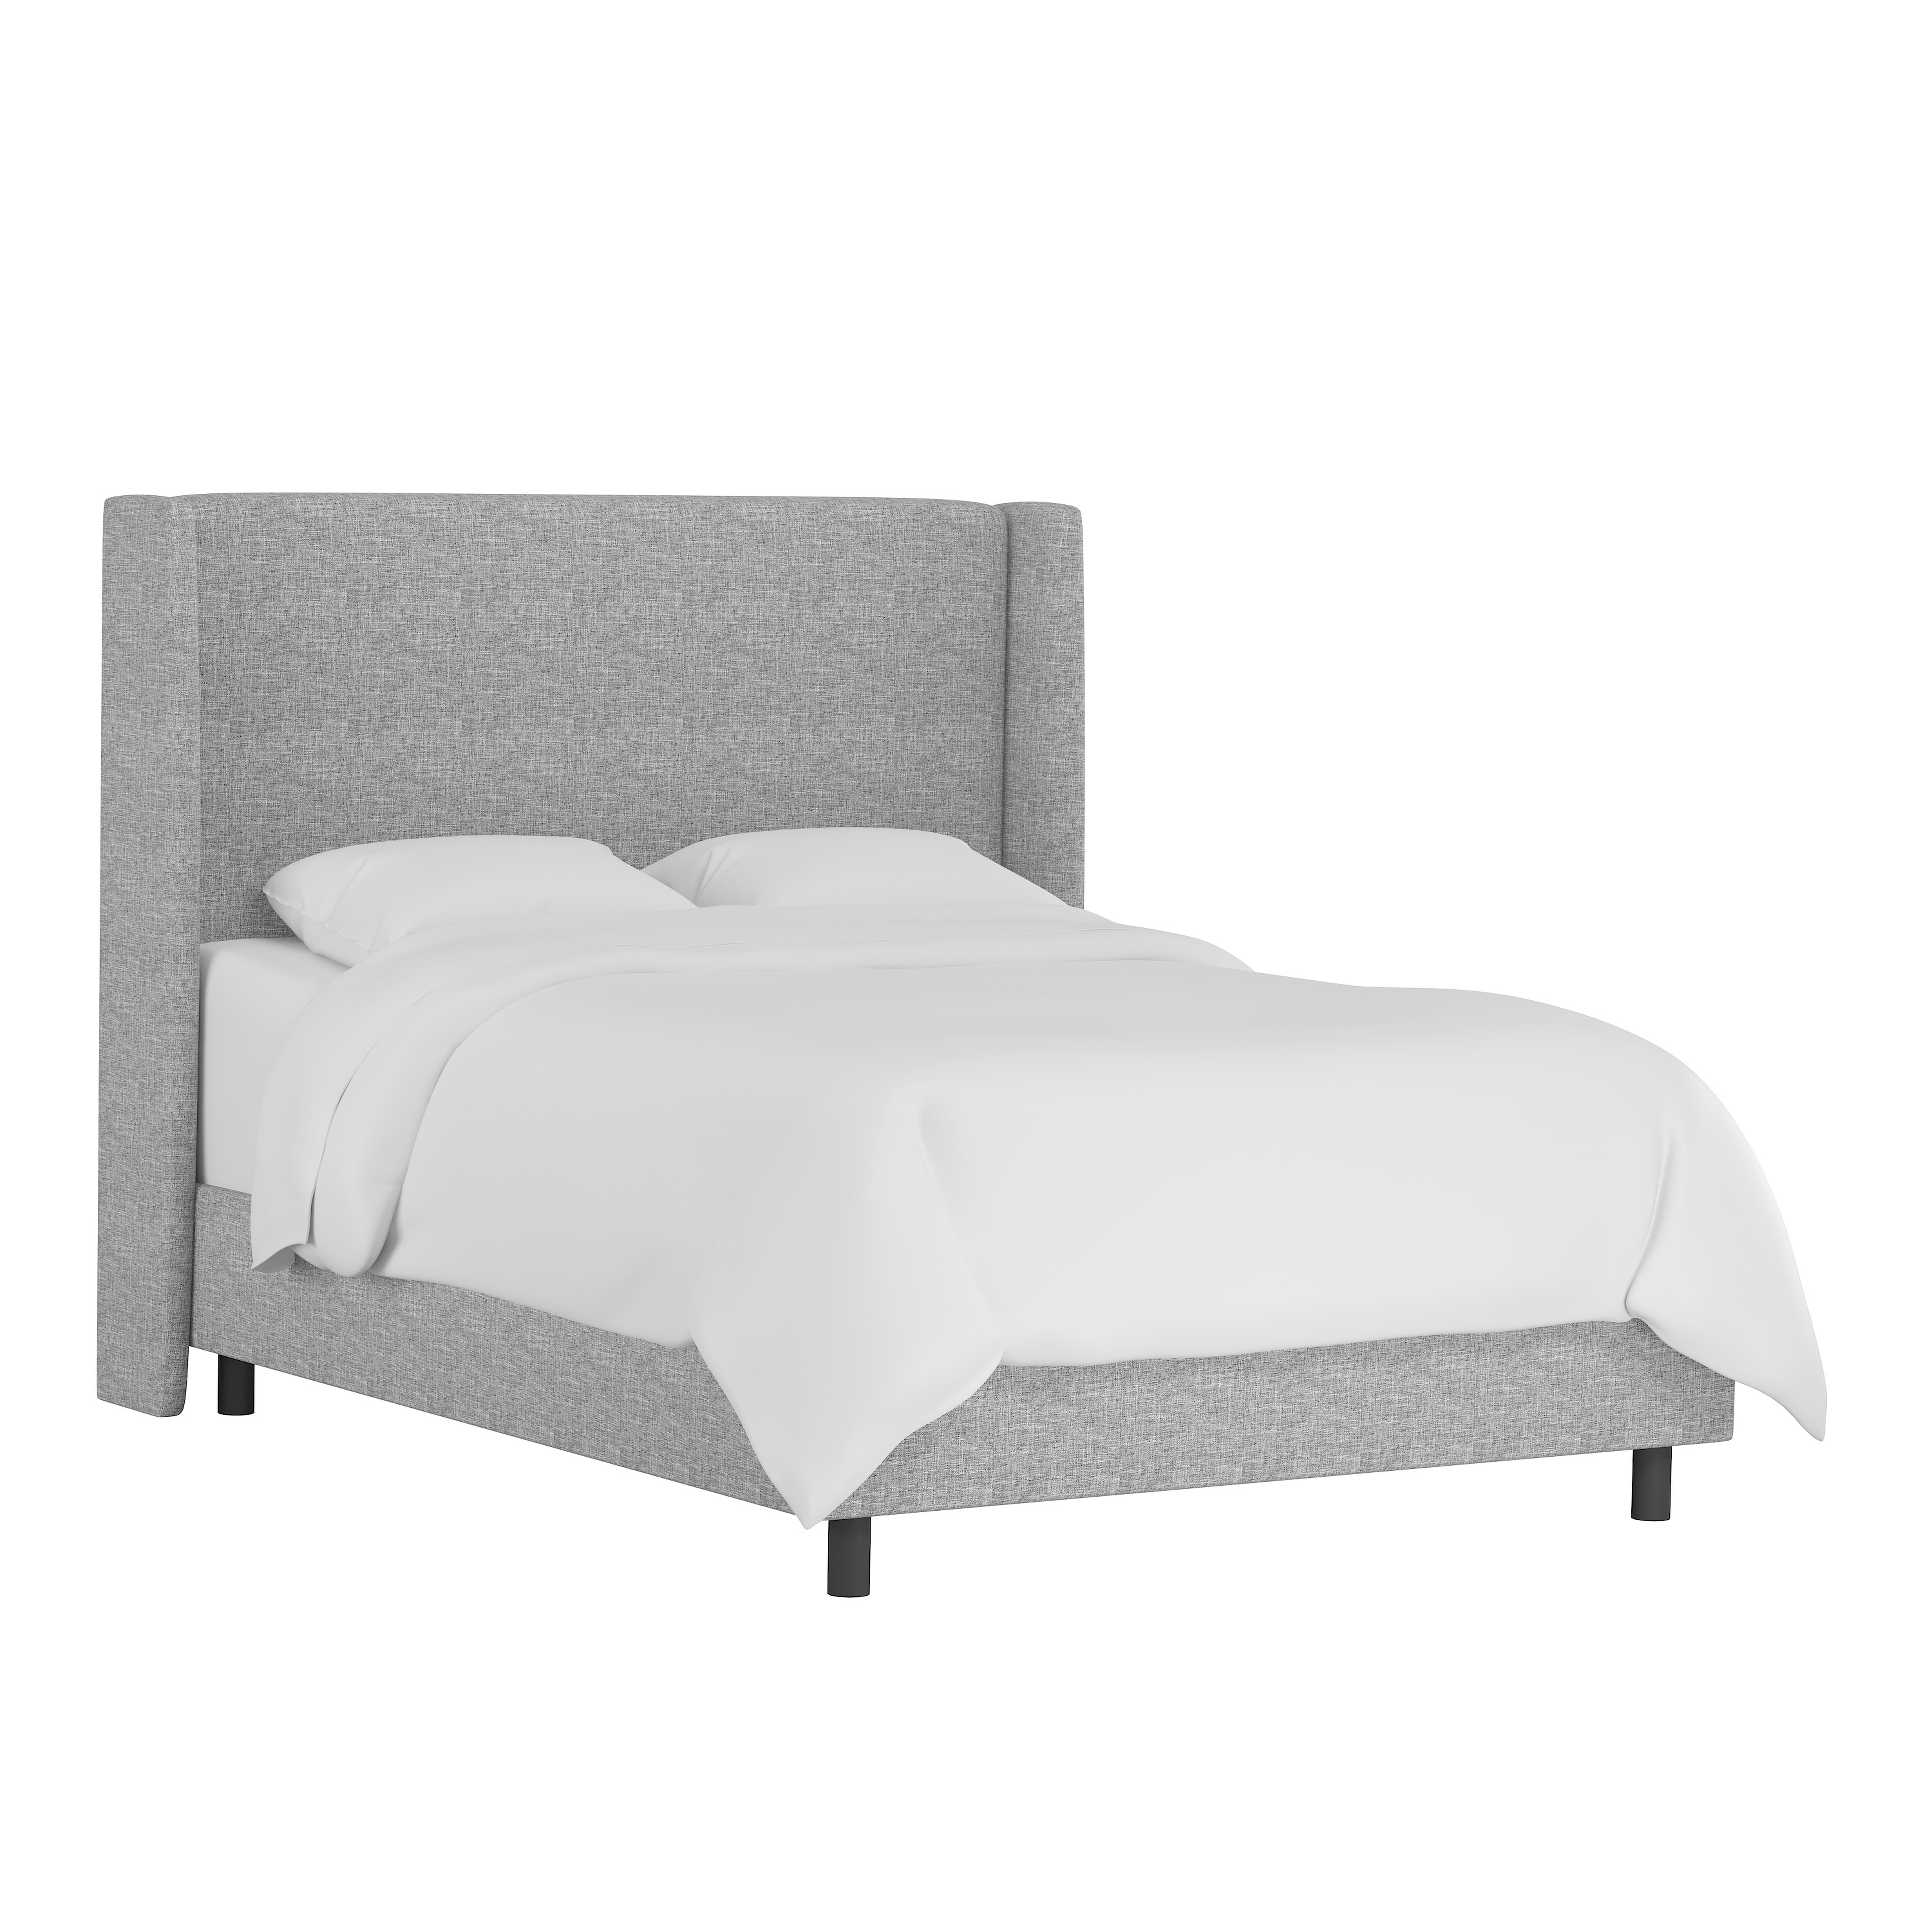 Bannock Wingback Bed, King, Pumice - Cove Goods